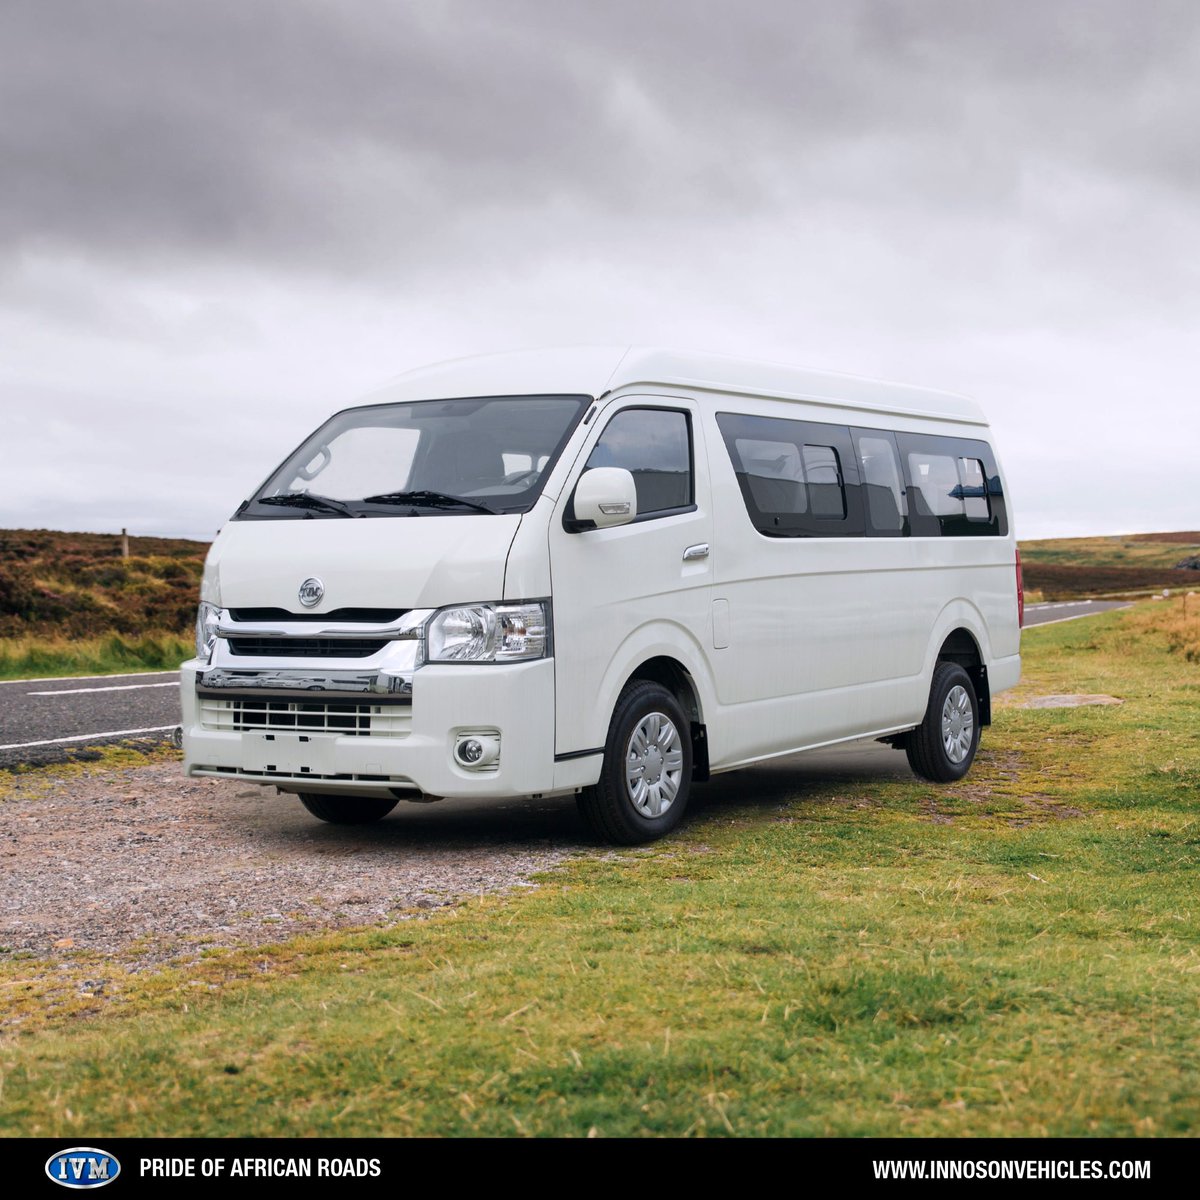 Meet the IVM Seriki 17 seater bus: the kind of ride that makes the destination jealous of the journey. Perfect for schools, hospitals, organizations. You can preorder today